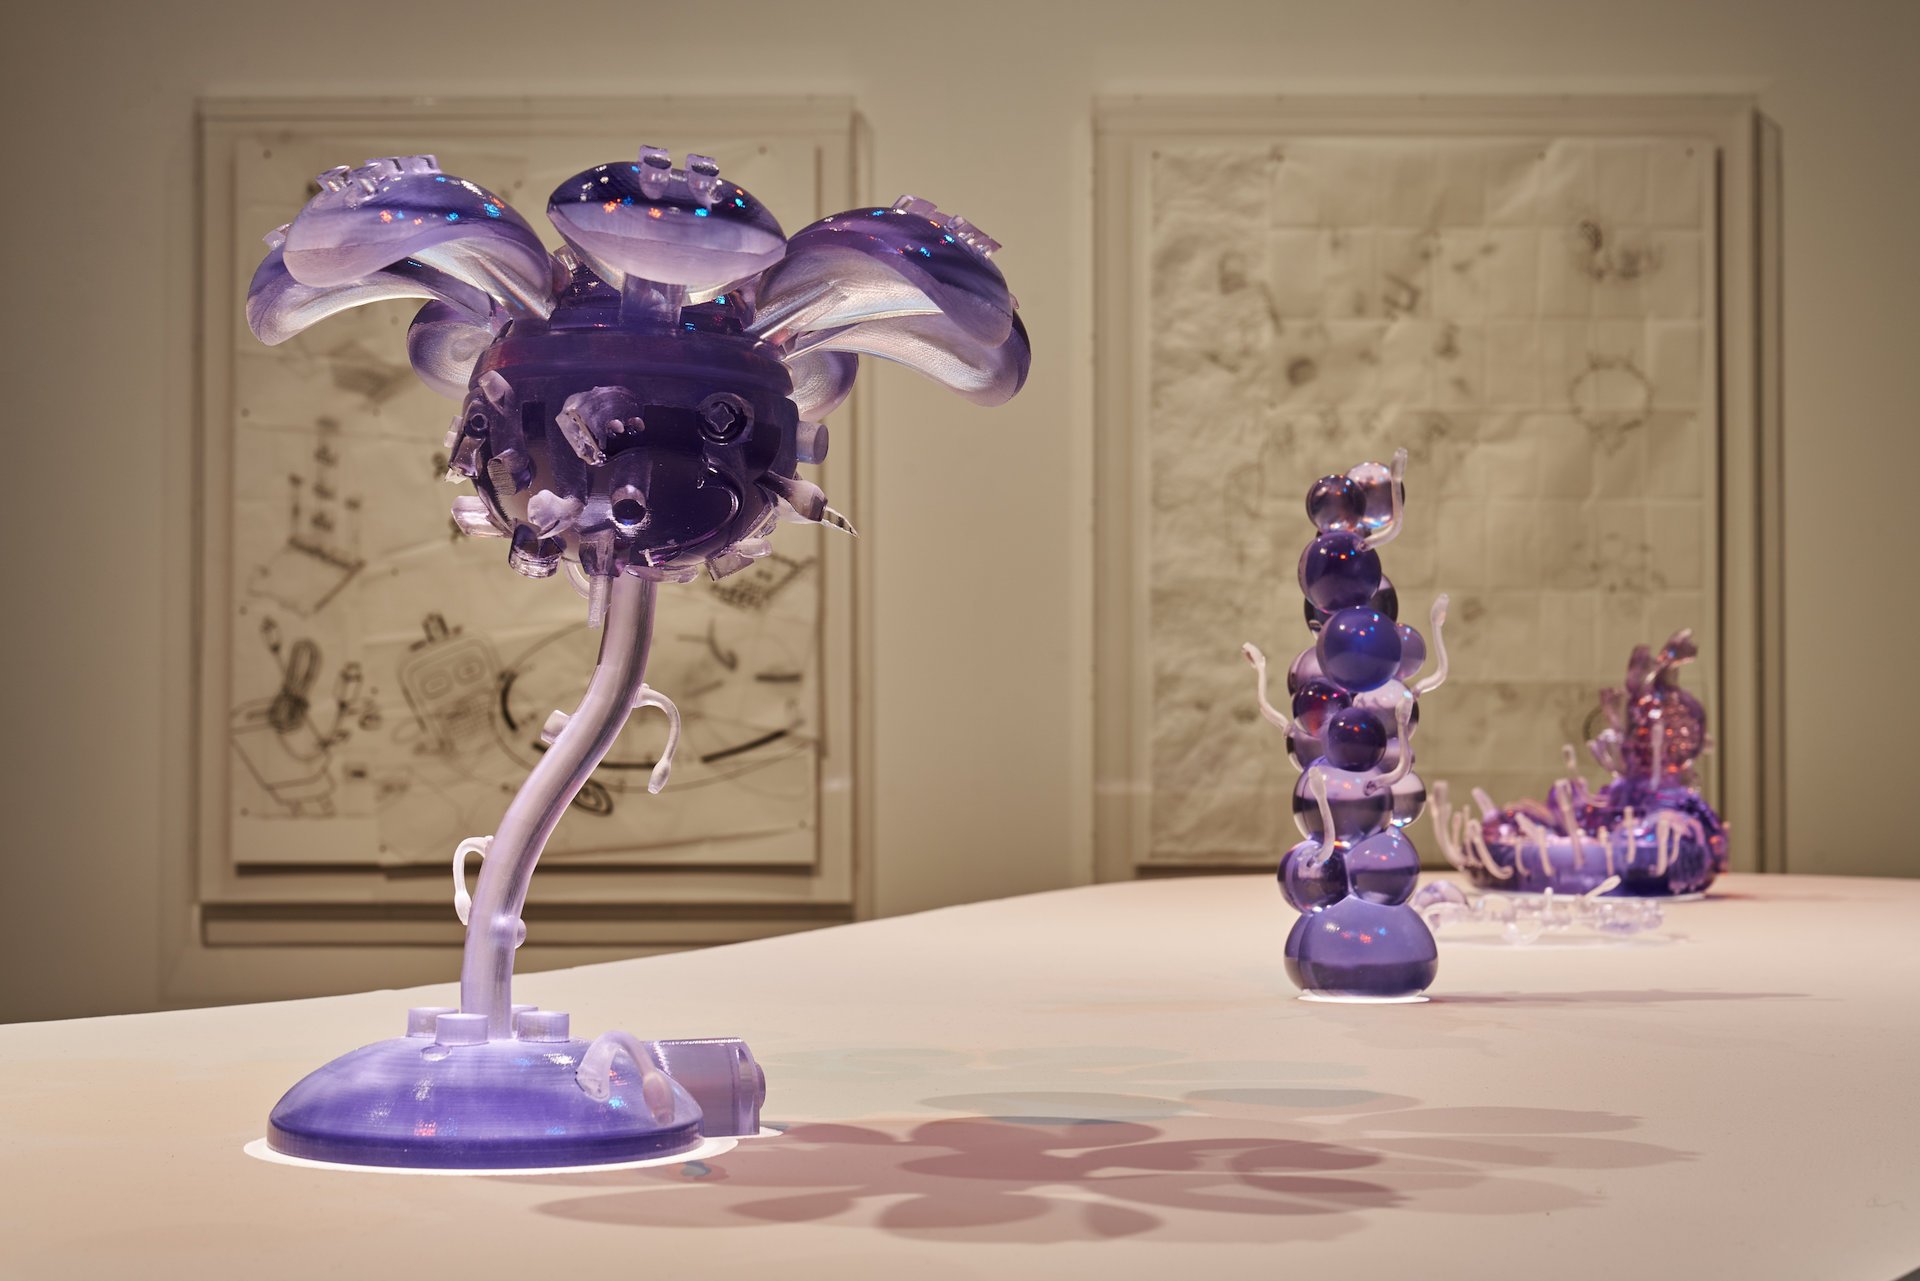  74 - An image which shows the top of a white, curved plinth. On it are four objects which have been 3D printed out of a purple-tinted, semi-transparent resin. Hidden within the plinth and lined up with the base of each object is a light source. The 